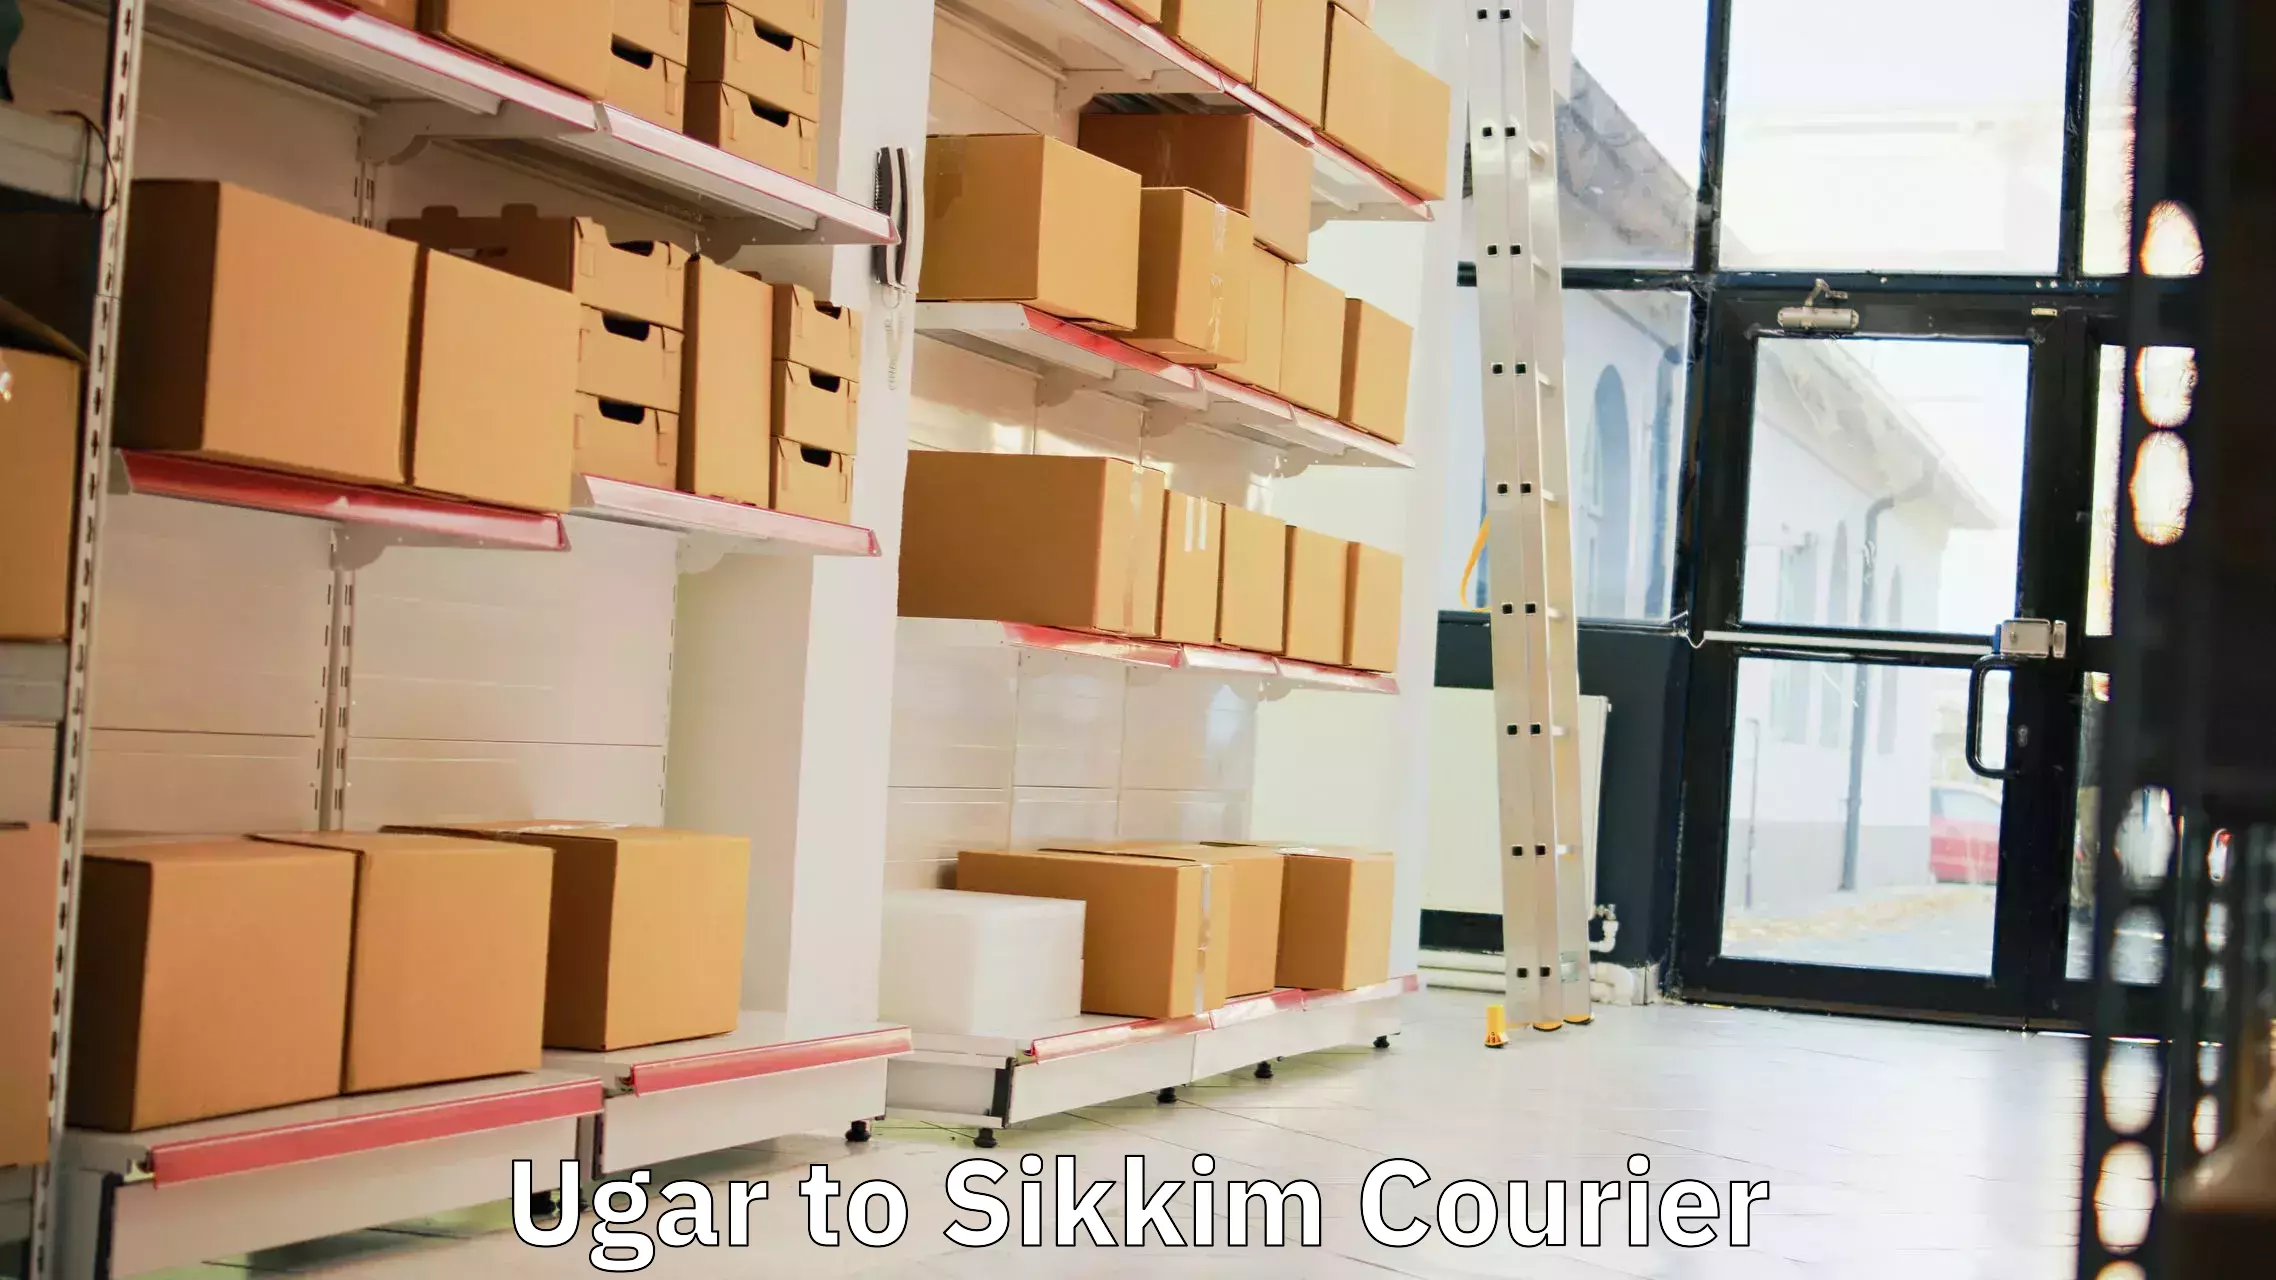 Holiday shipping services in Ugar to Sikkim